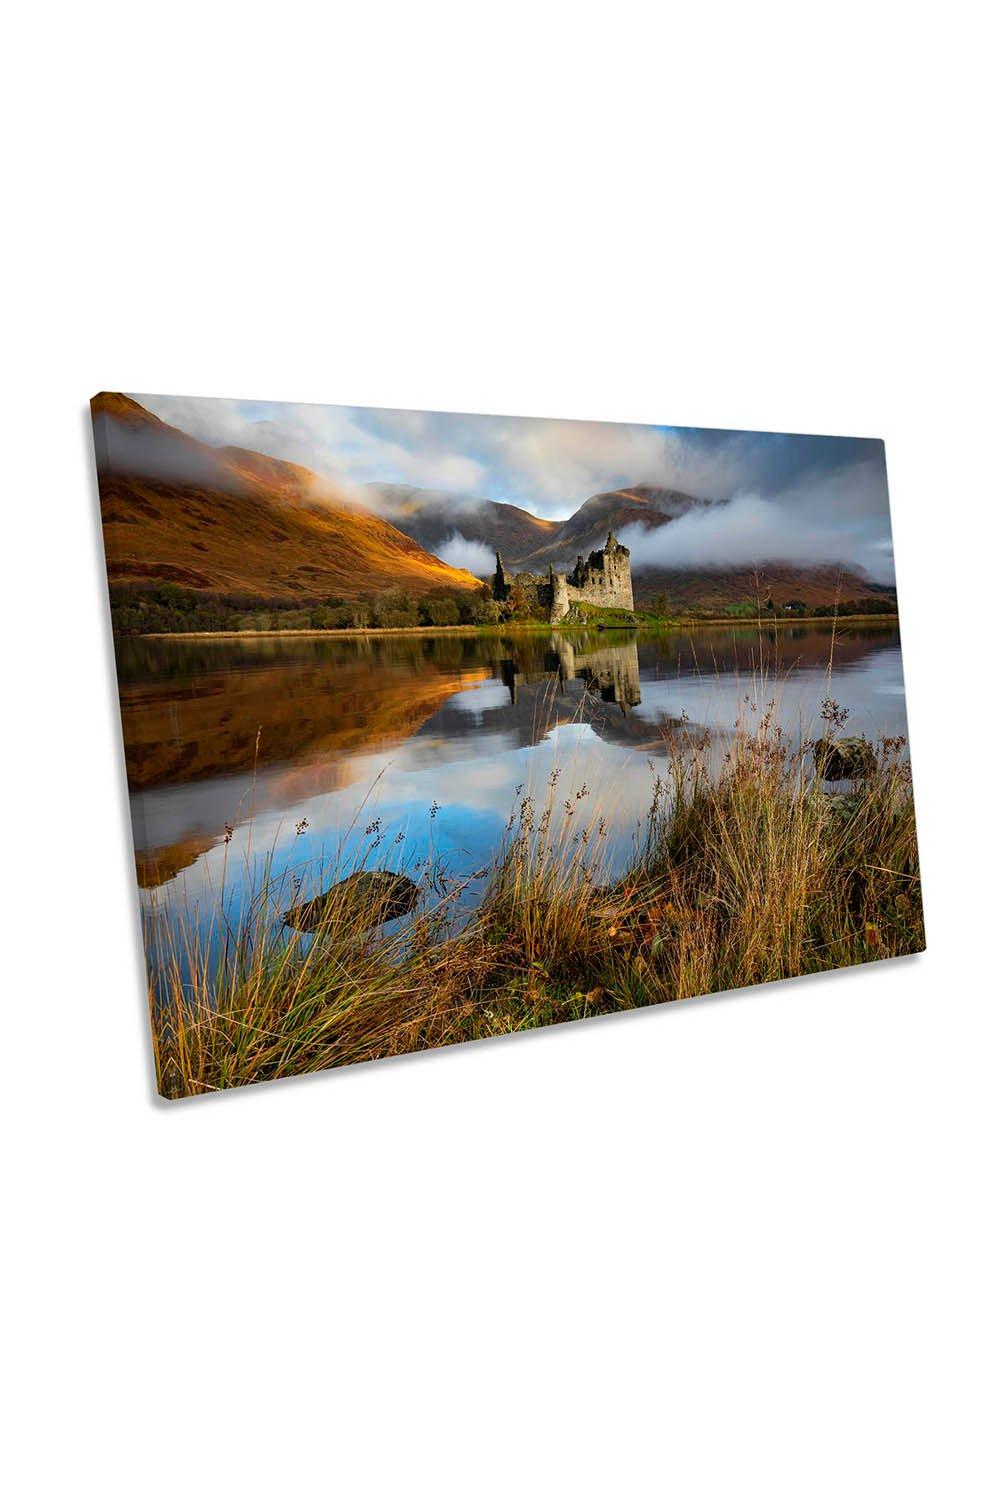 Still Waters at Loch Awe Scotland Castle Canvas Wall Art Picture Print